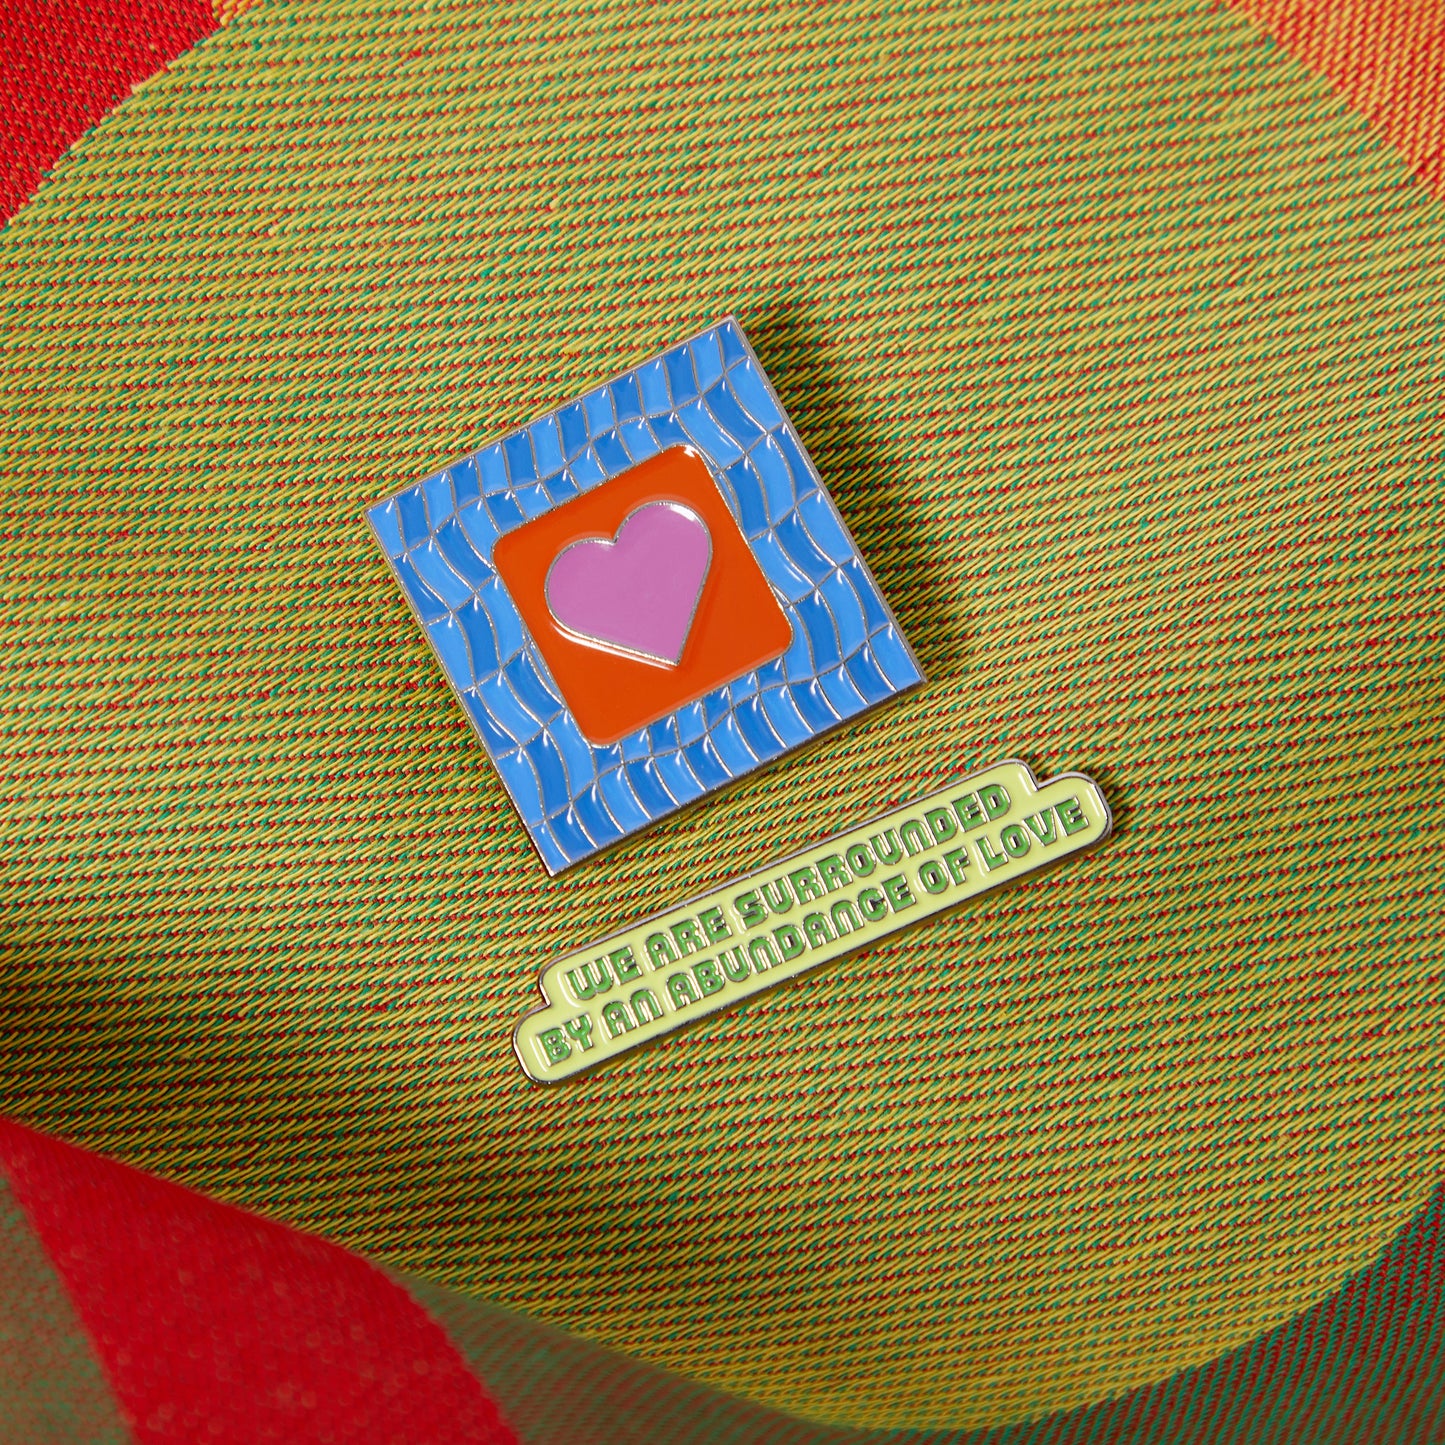 WE ARE SURROUNDED BY AN ABUNDANCE OF LOVE Enamel Pin Badge